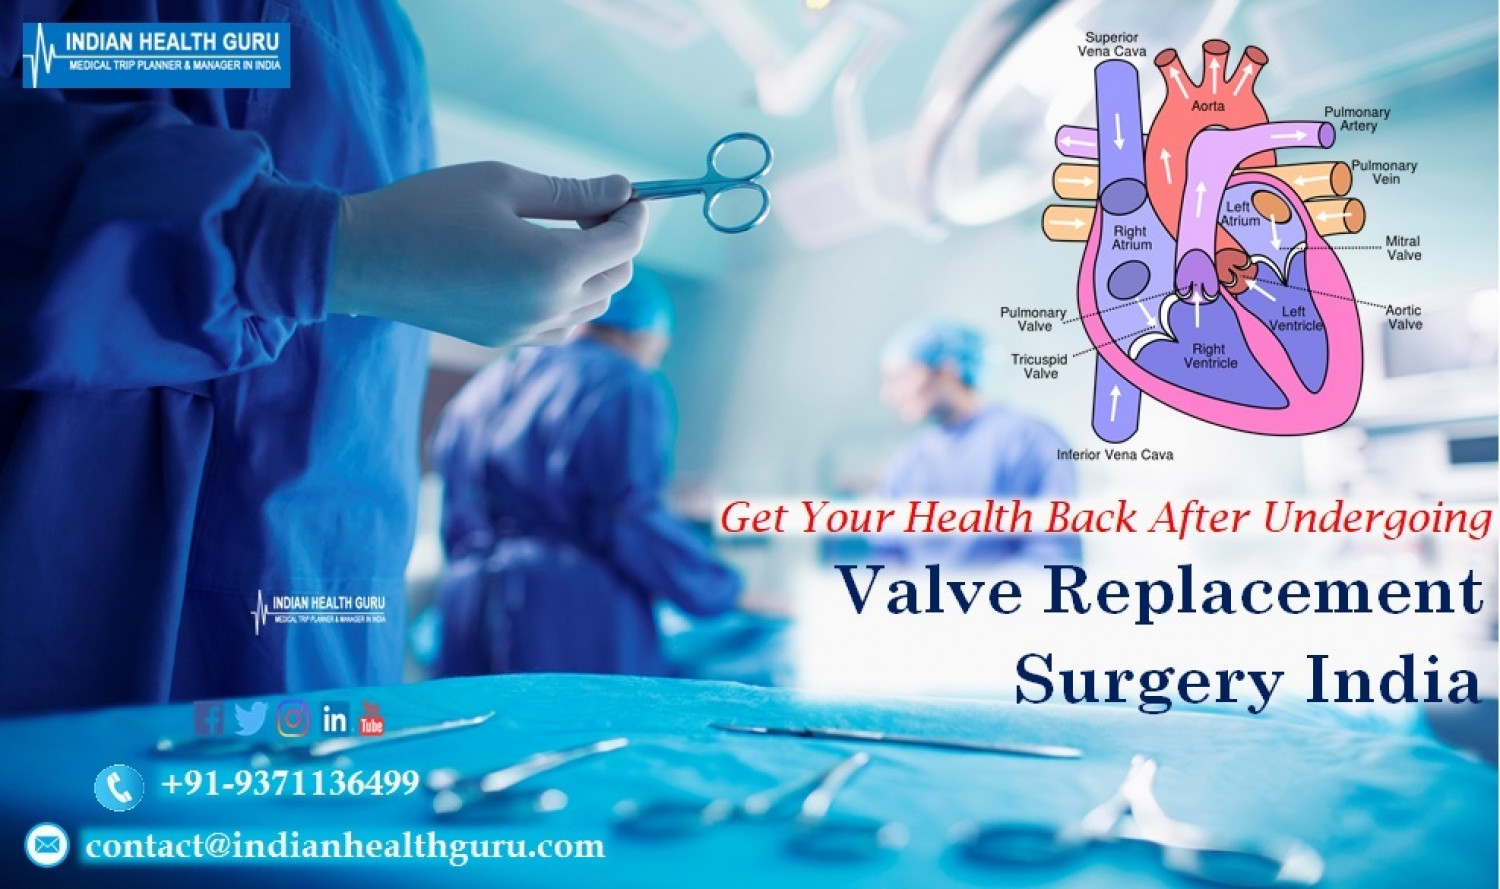 Get Your Health Back After Undergoing Valve Replacement Surgery India Infographic